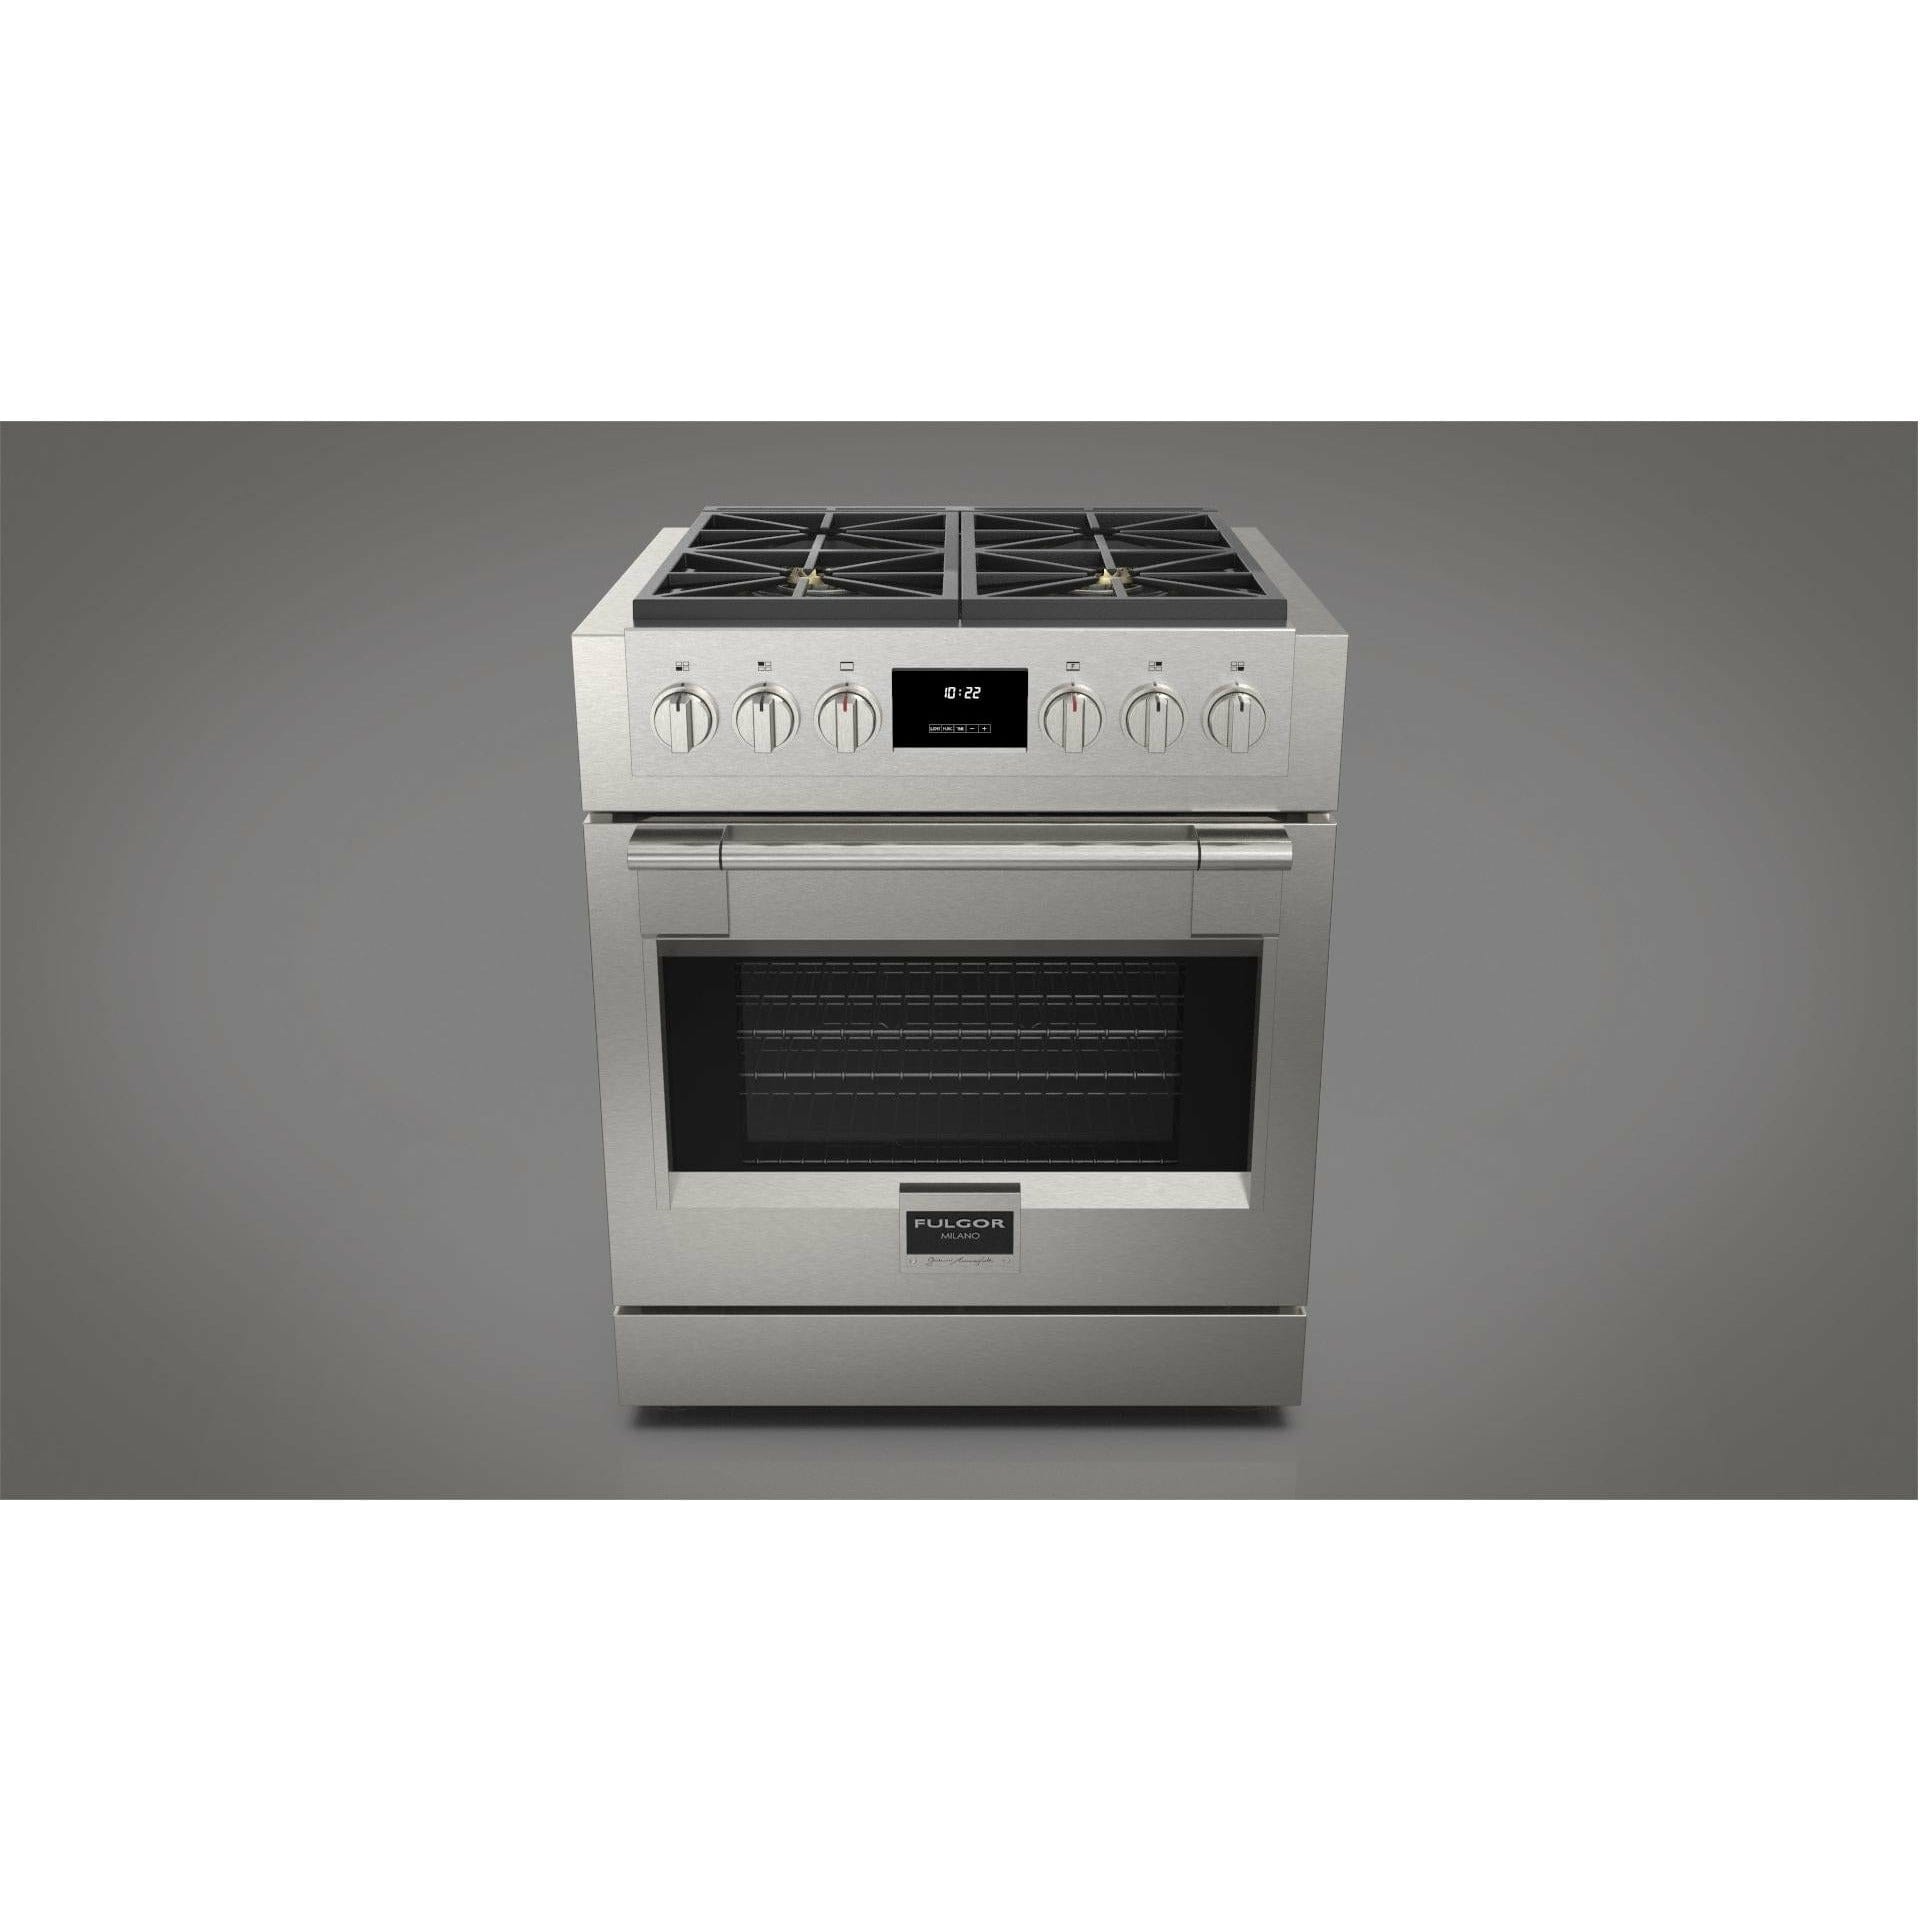 Fulgor Milano 30" Professional All Gas Range with 4 Dual-Flame Burners, 4.4 cu. ft. Capacity w/ Stainless Steel - F6PGR304S2 Ranges F6PGR304S2 Luxury Appliances Direct